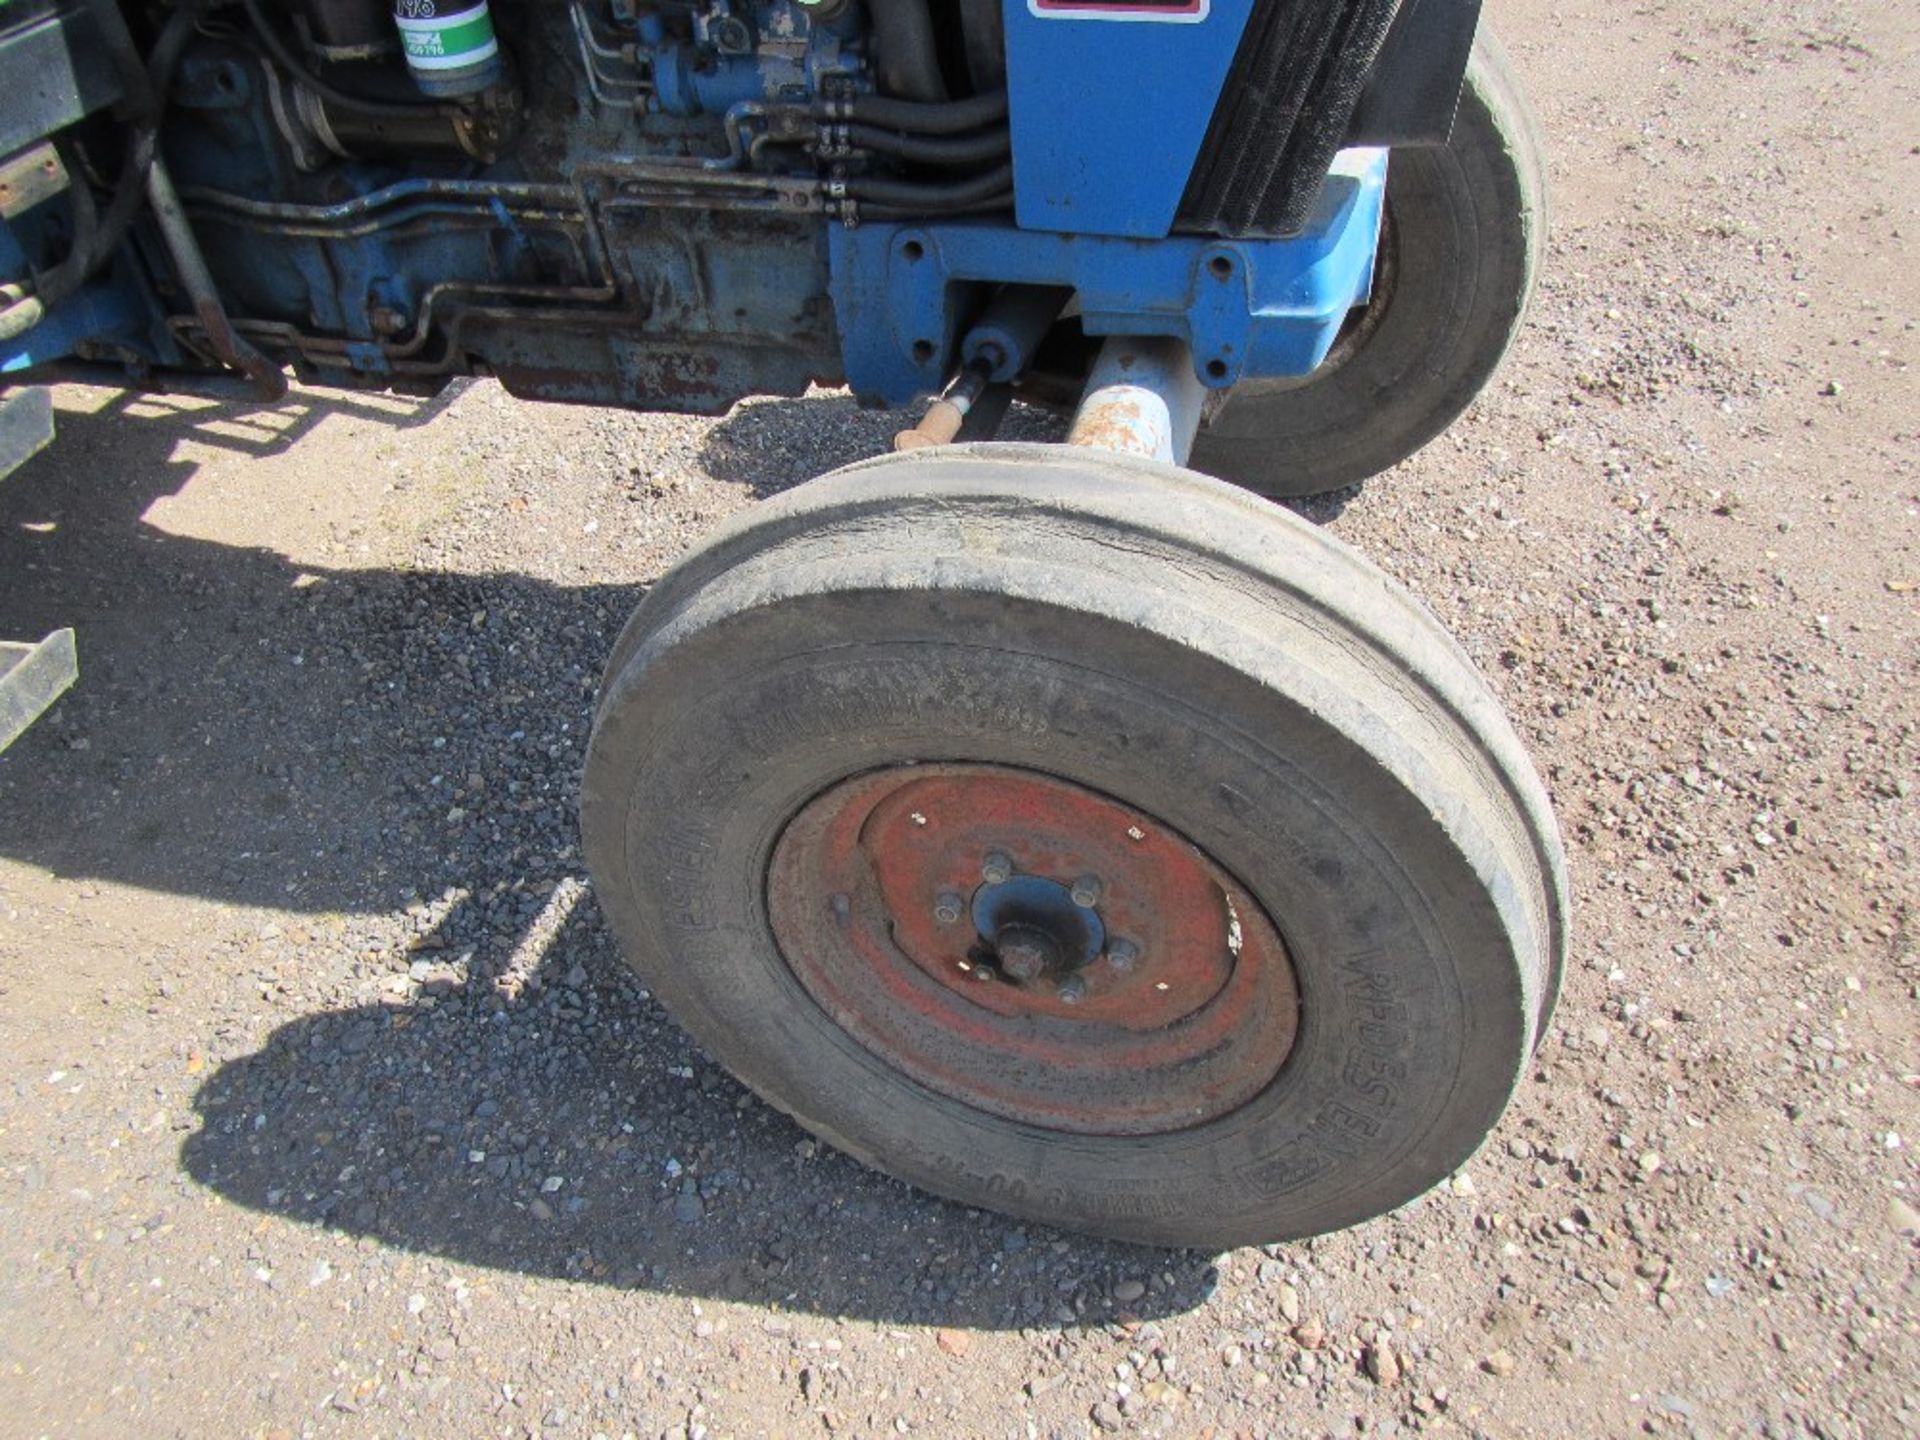 Ford 5030 Tractor with 3 Point Linkage and Auto Hitch. New clutch recently fitted. Reg. No. M955 BNH - Image 4 of 17